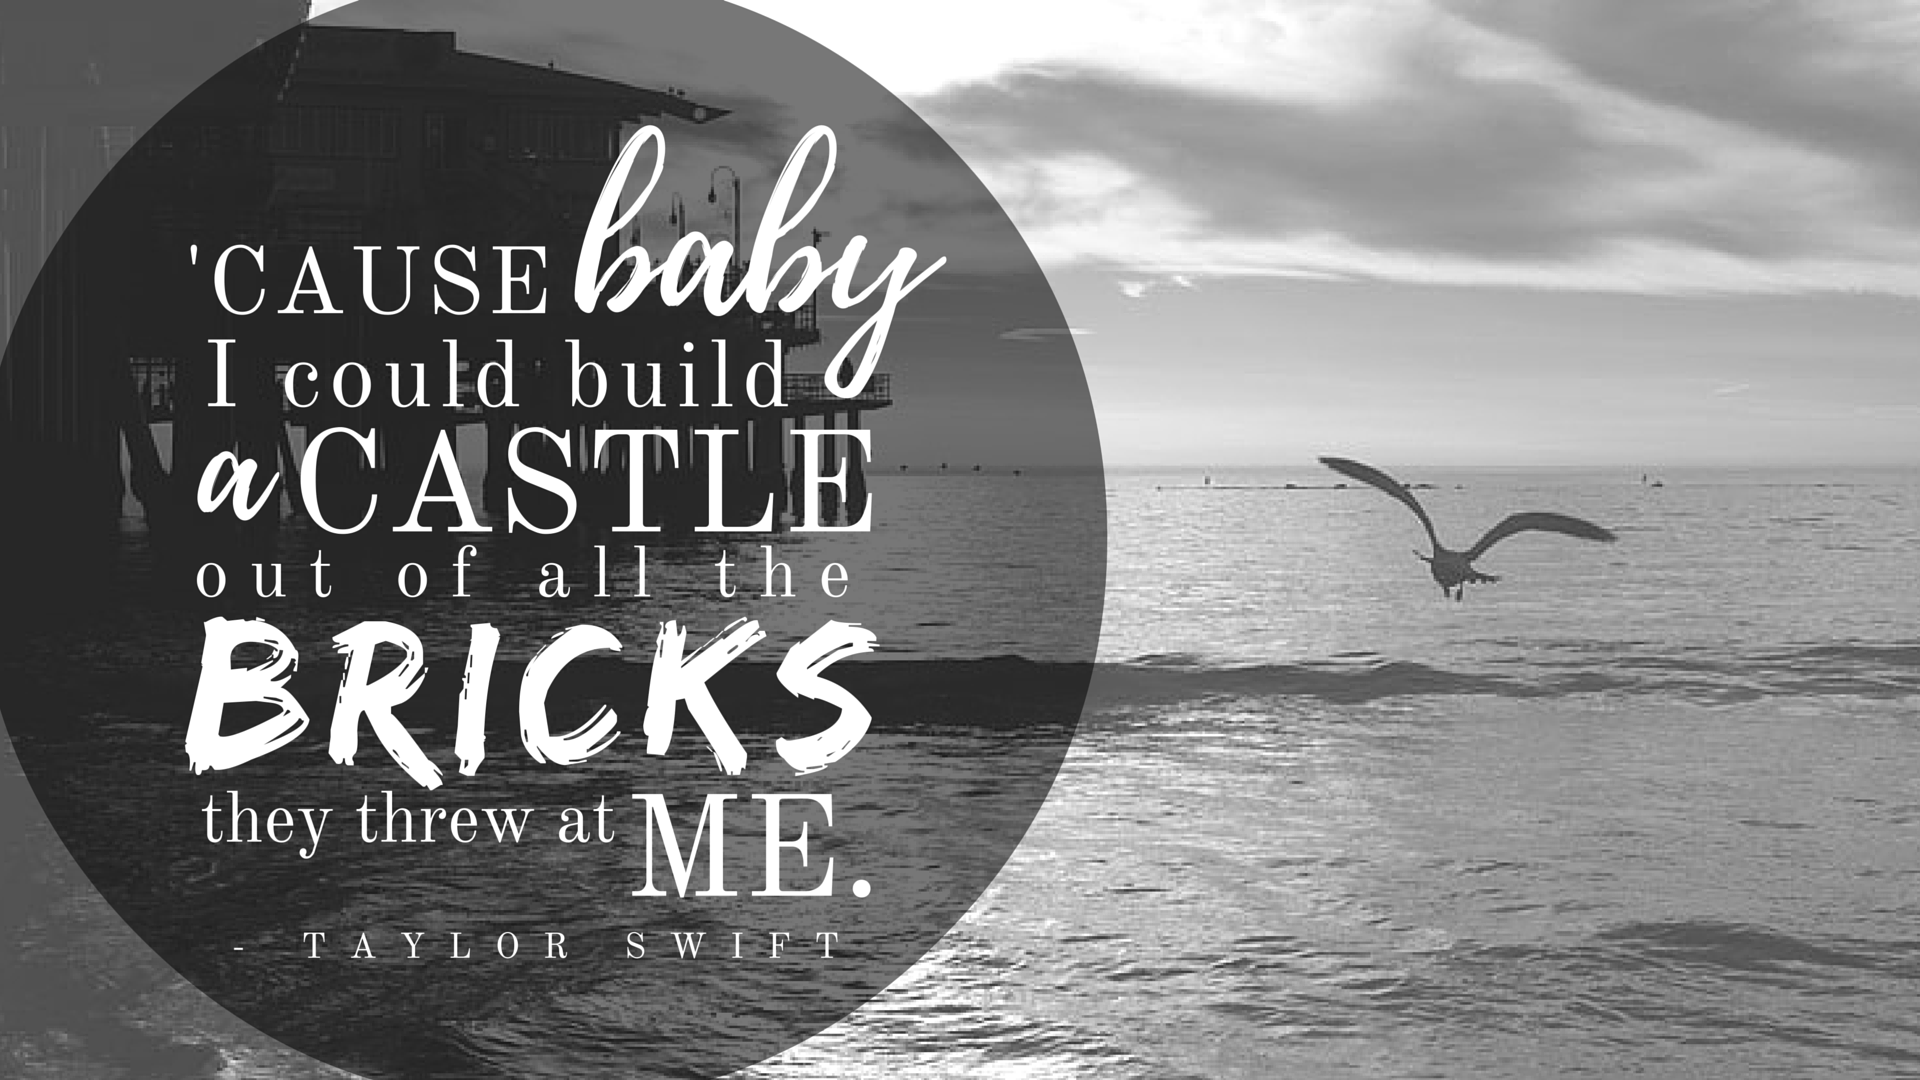 'Cause baby I could build a castle out of all the bricks they threw at me. - Taylor Swift